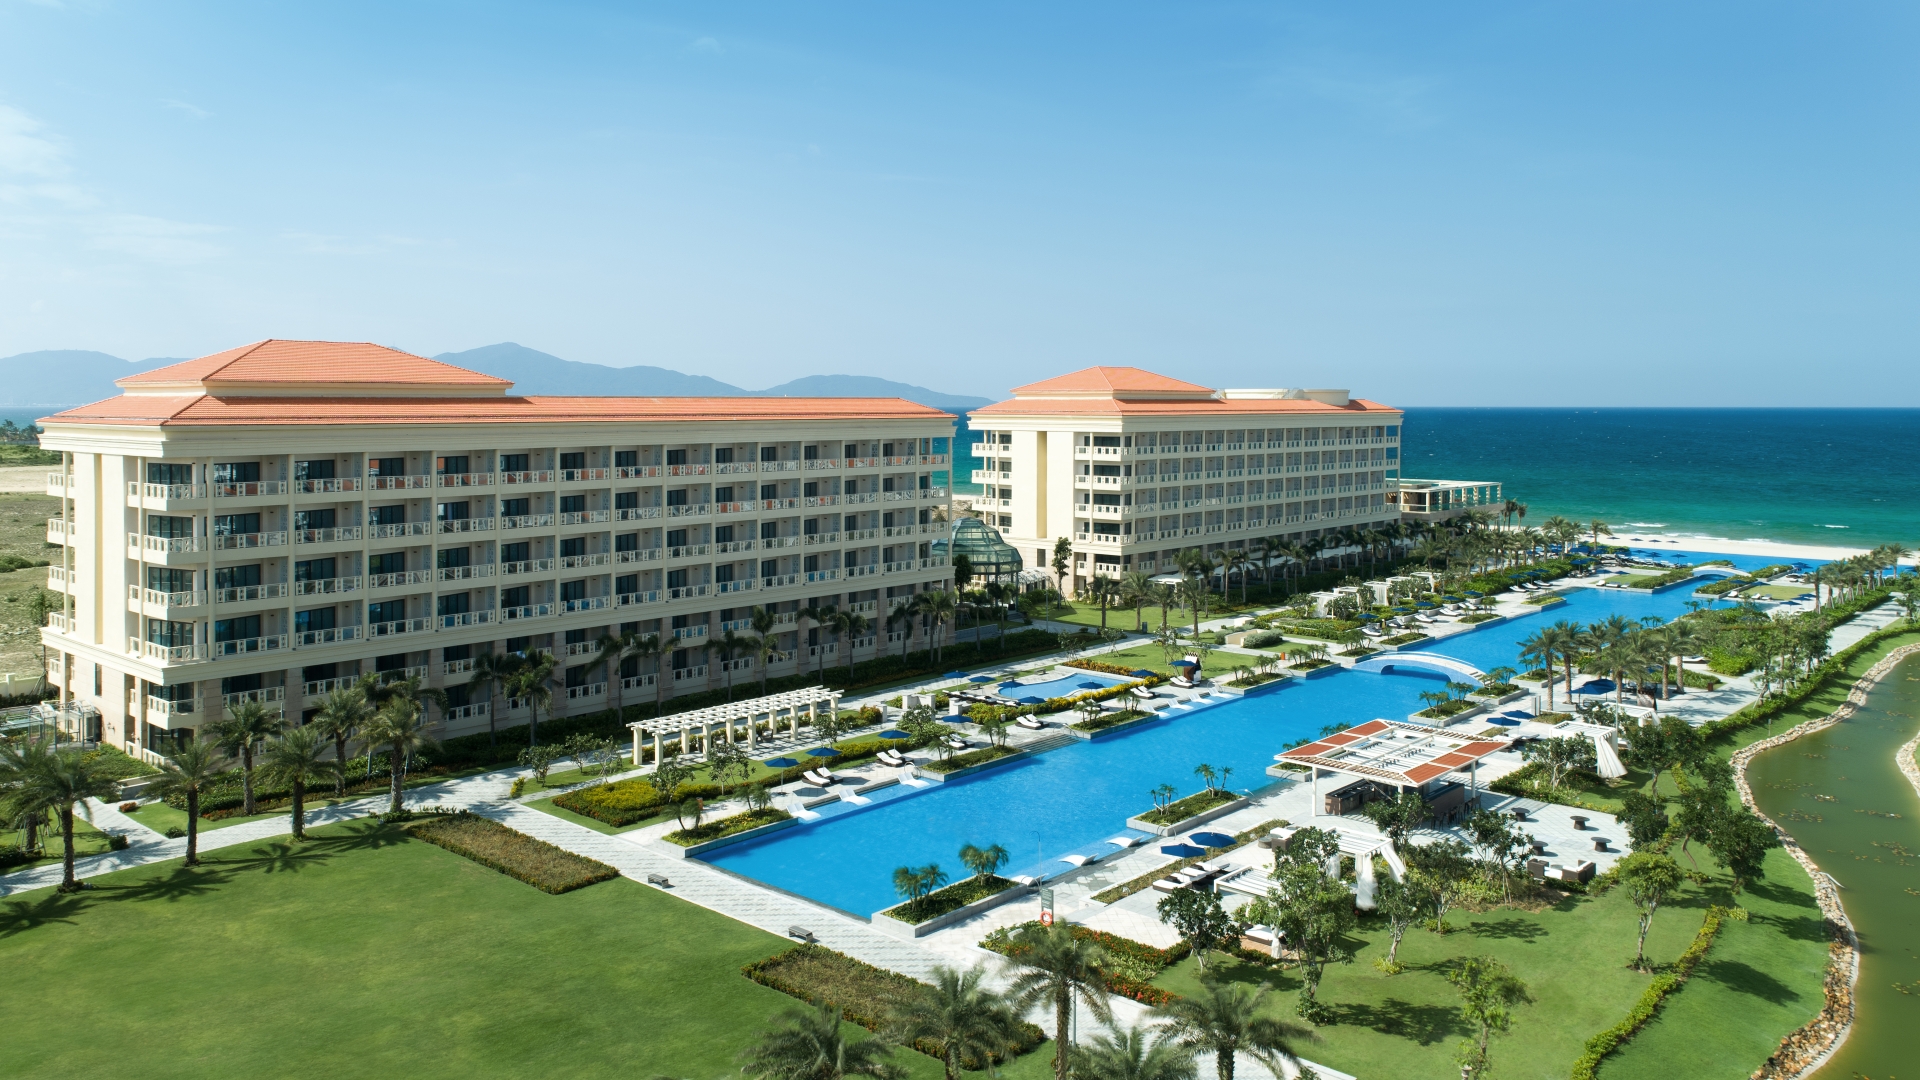 BRG Group’s Sheraton Grand Danang – top destination for the super-rich